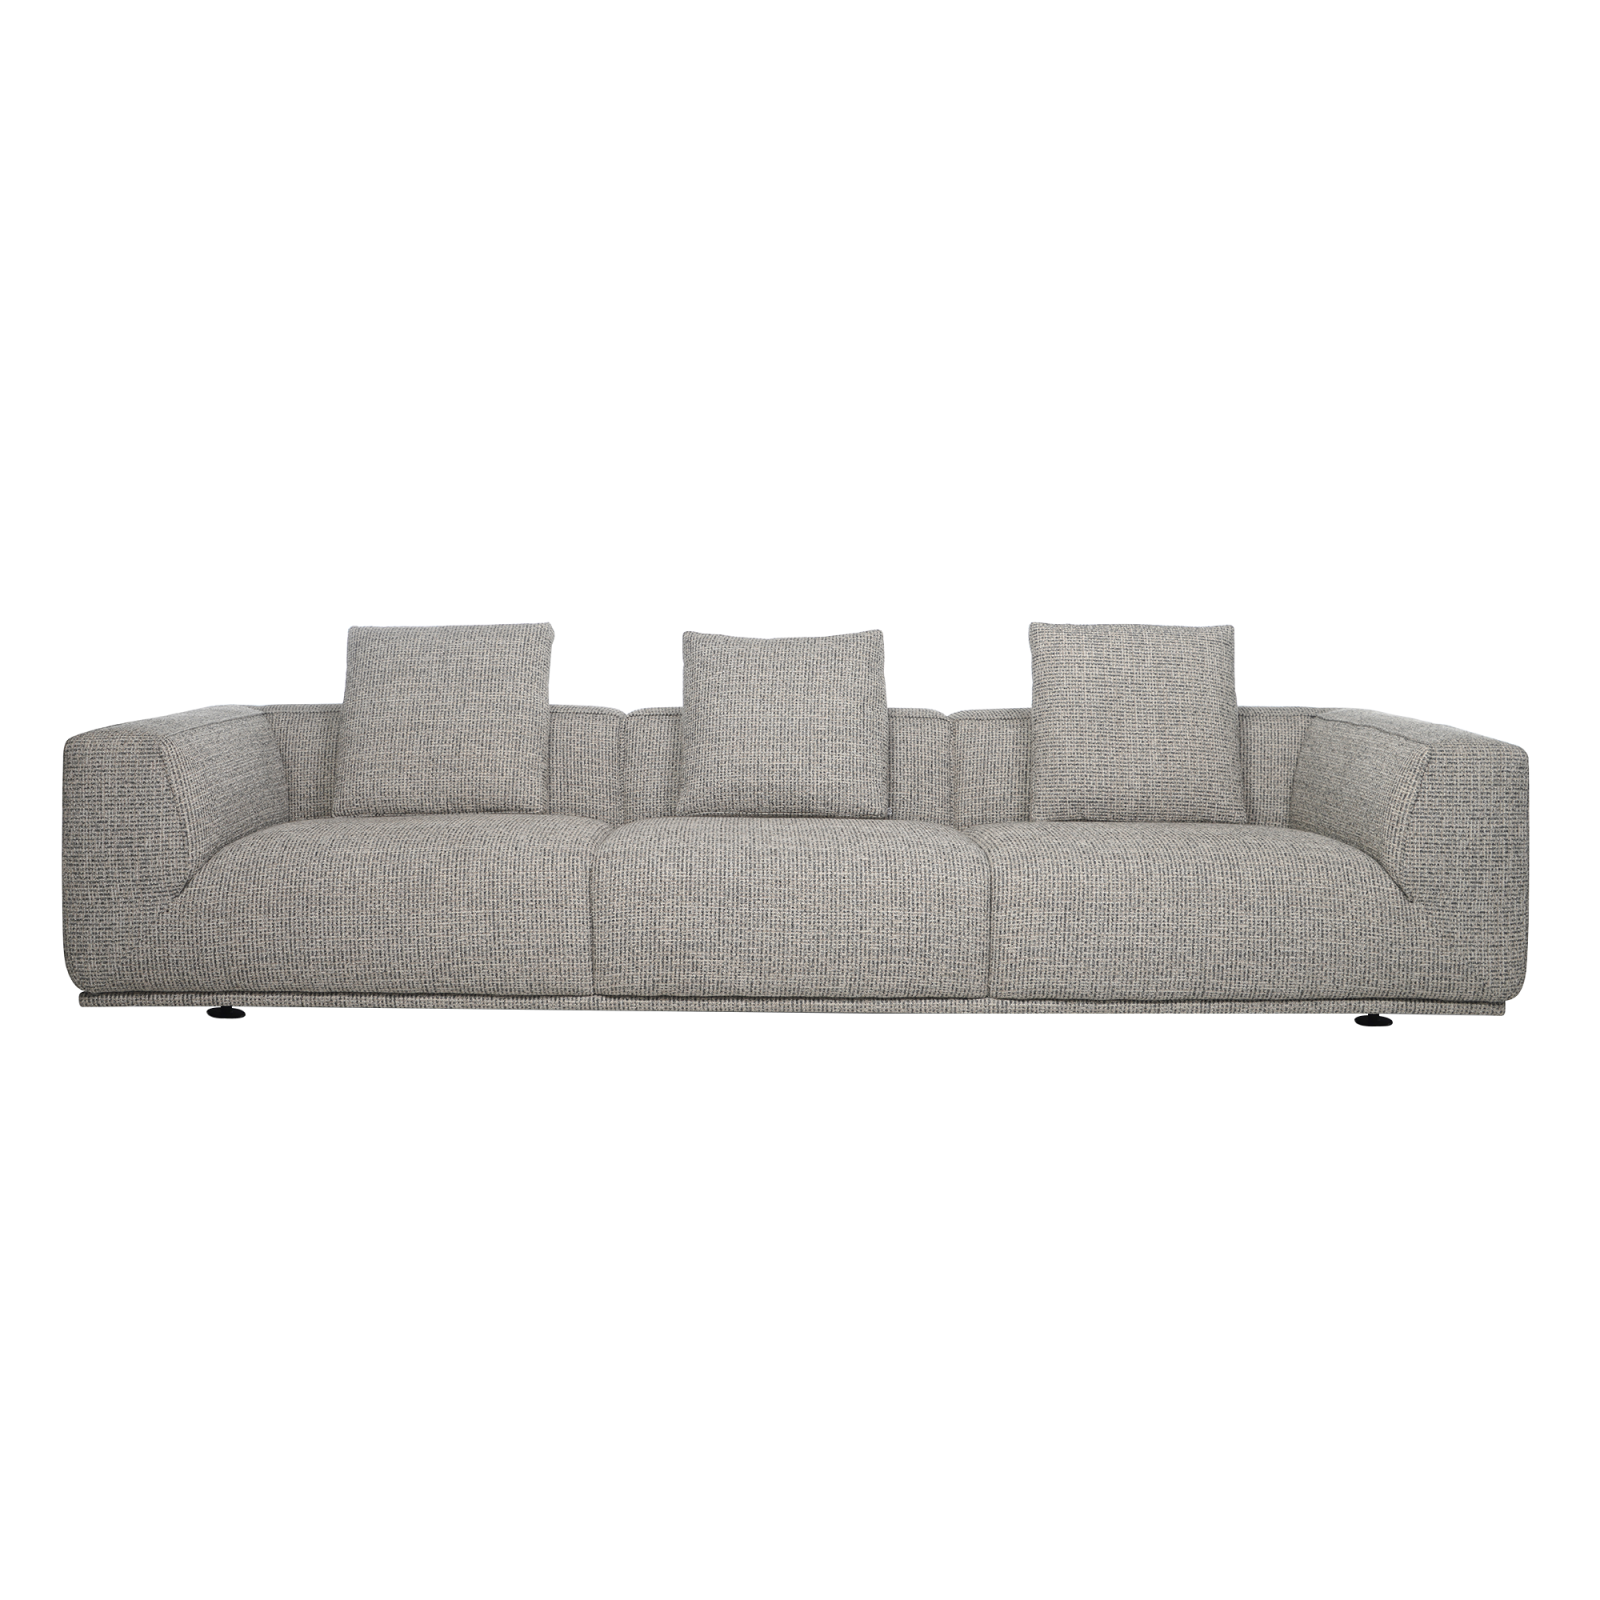 Case Sofa standing in front of a white wall